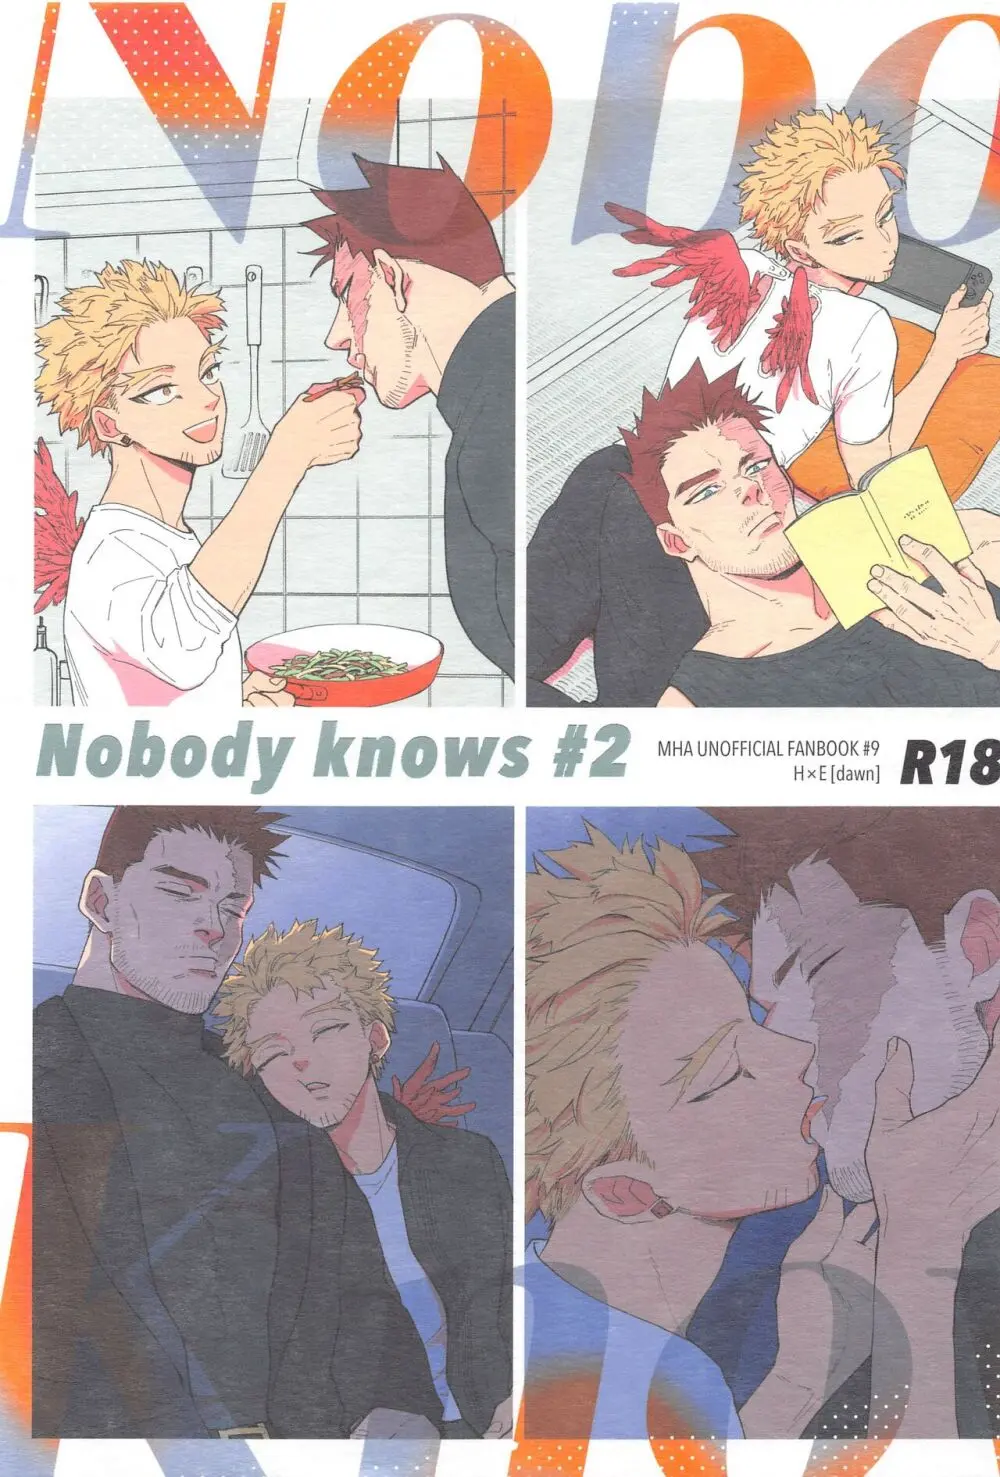 Nobody knows #2